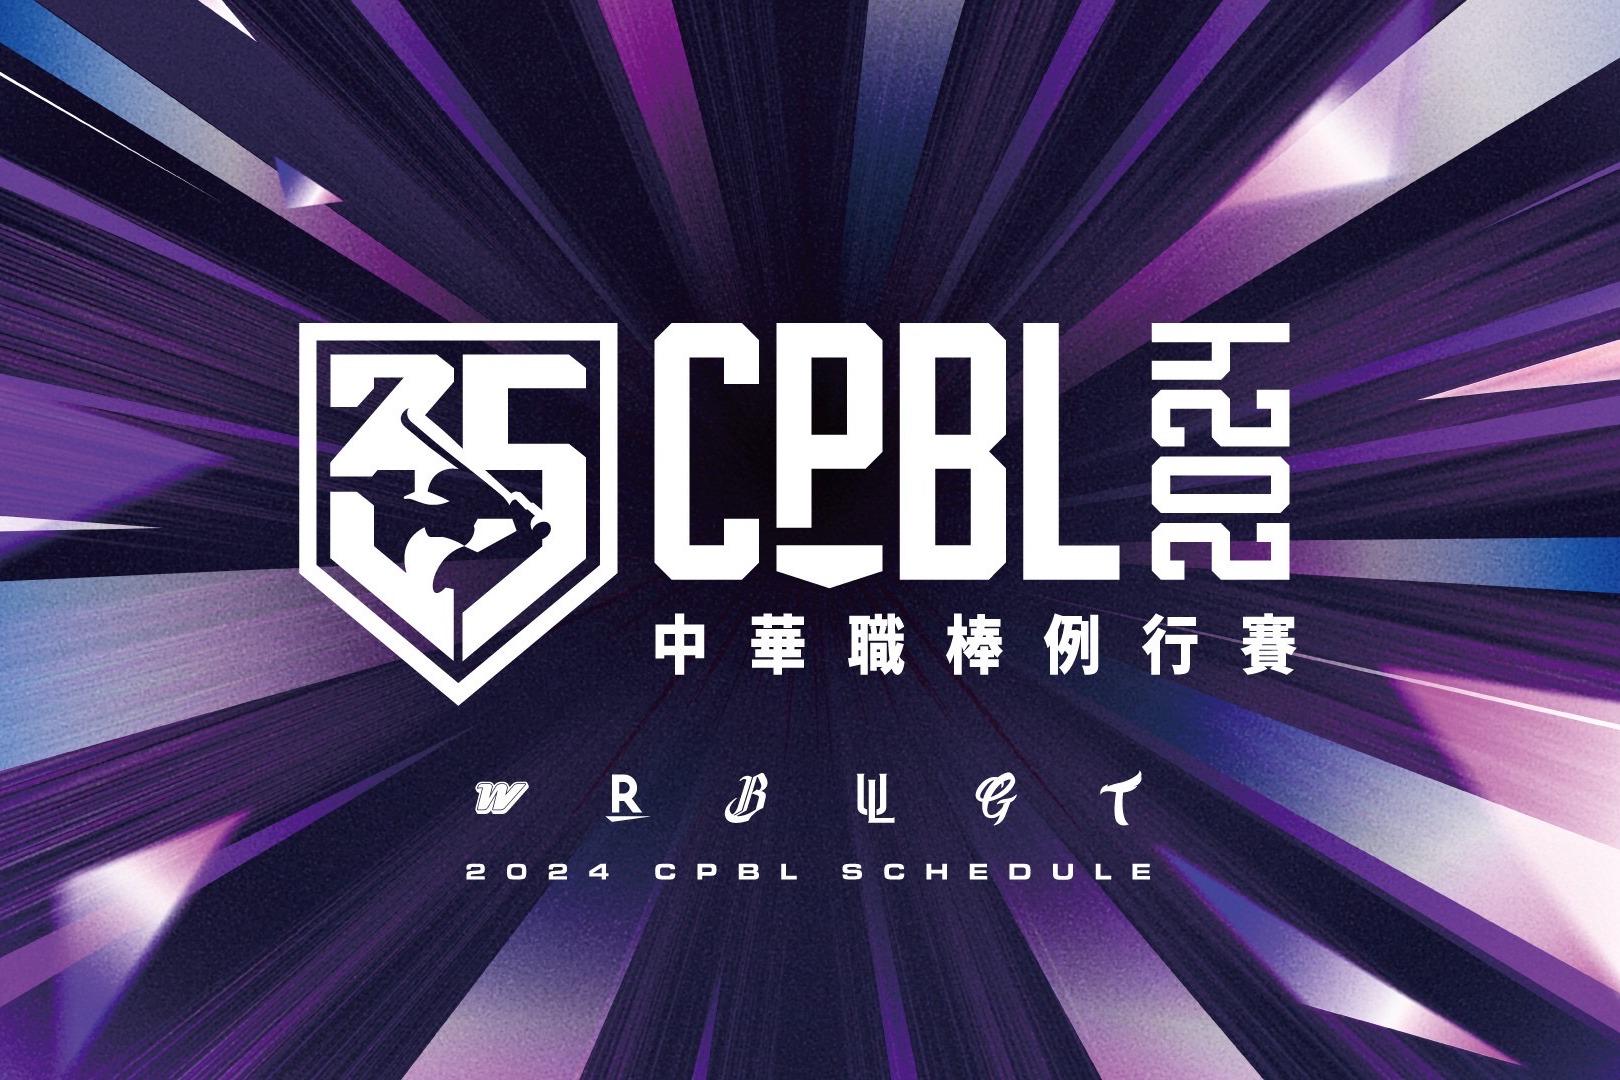 CPBL 35th Season Schedule Released: Dragons to Face Lotte Peach Monkey in Opening Match